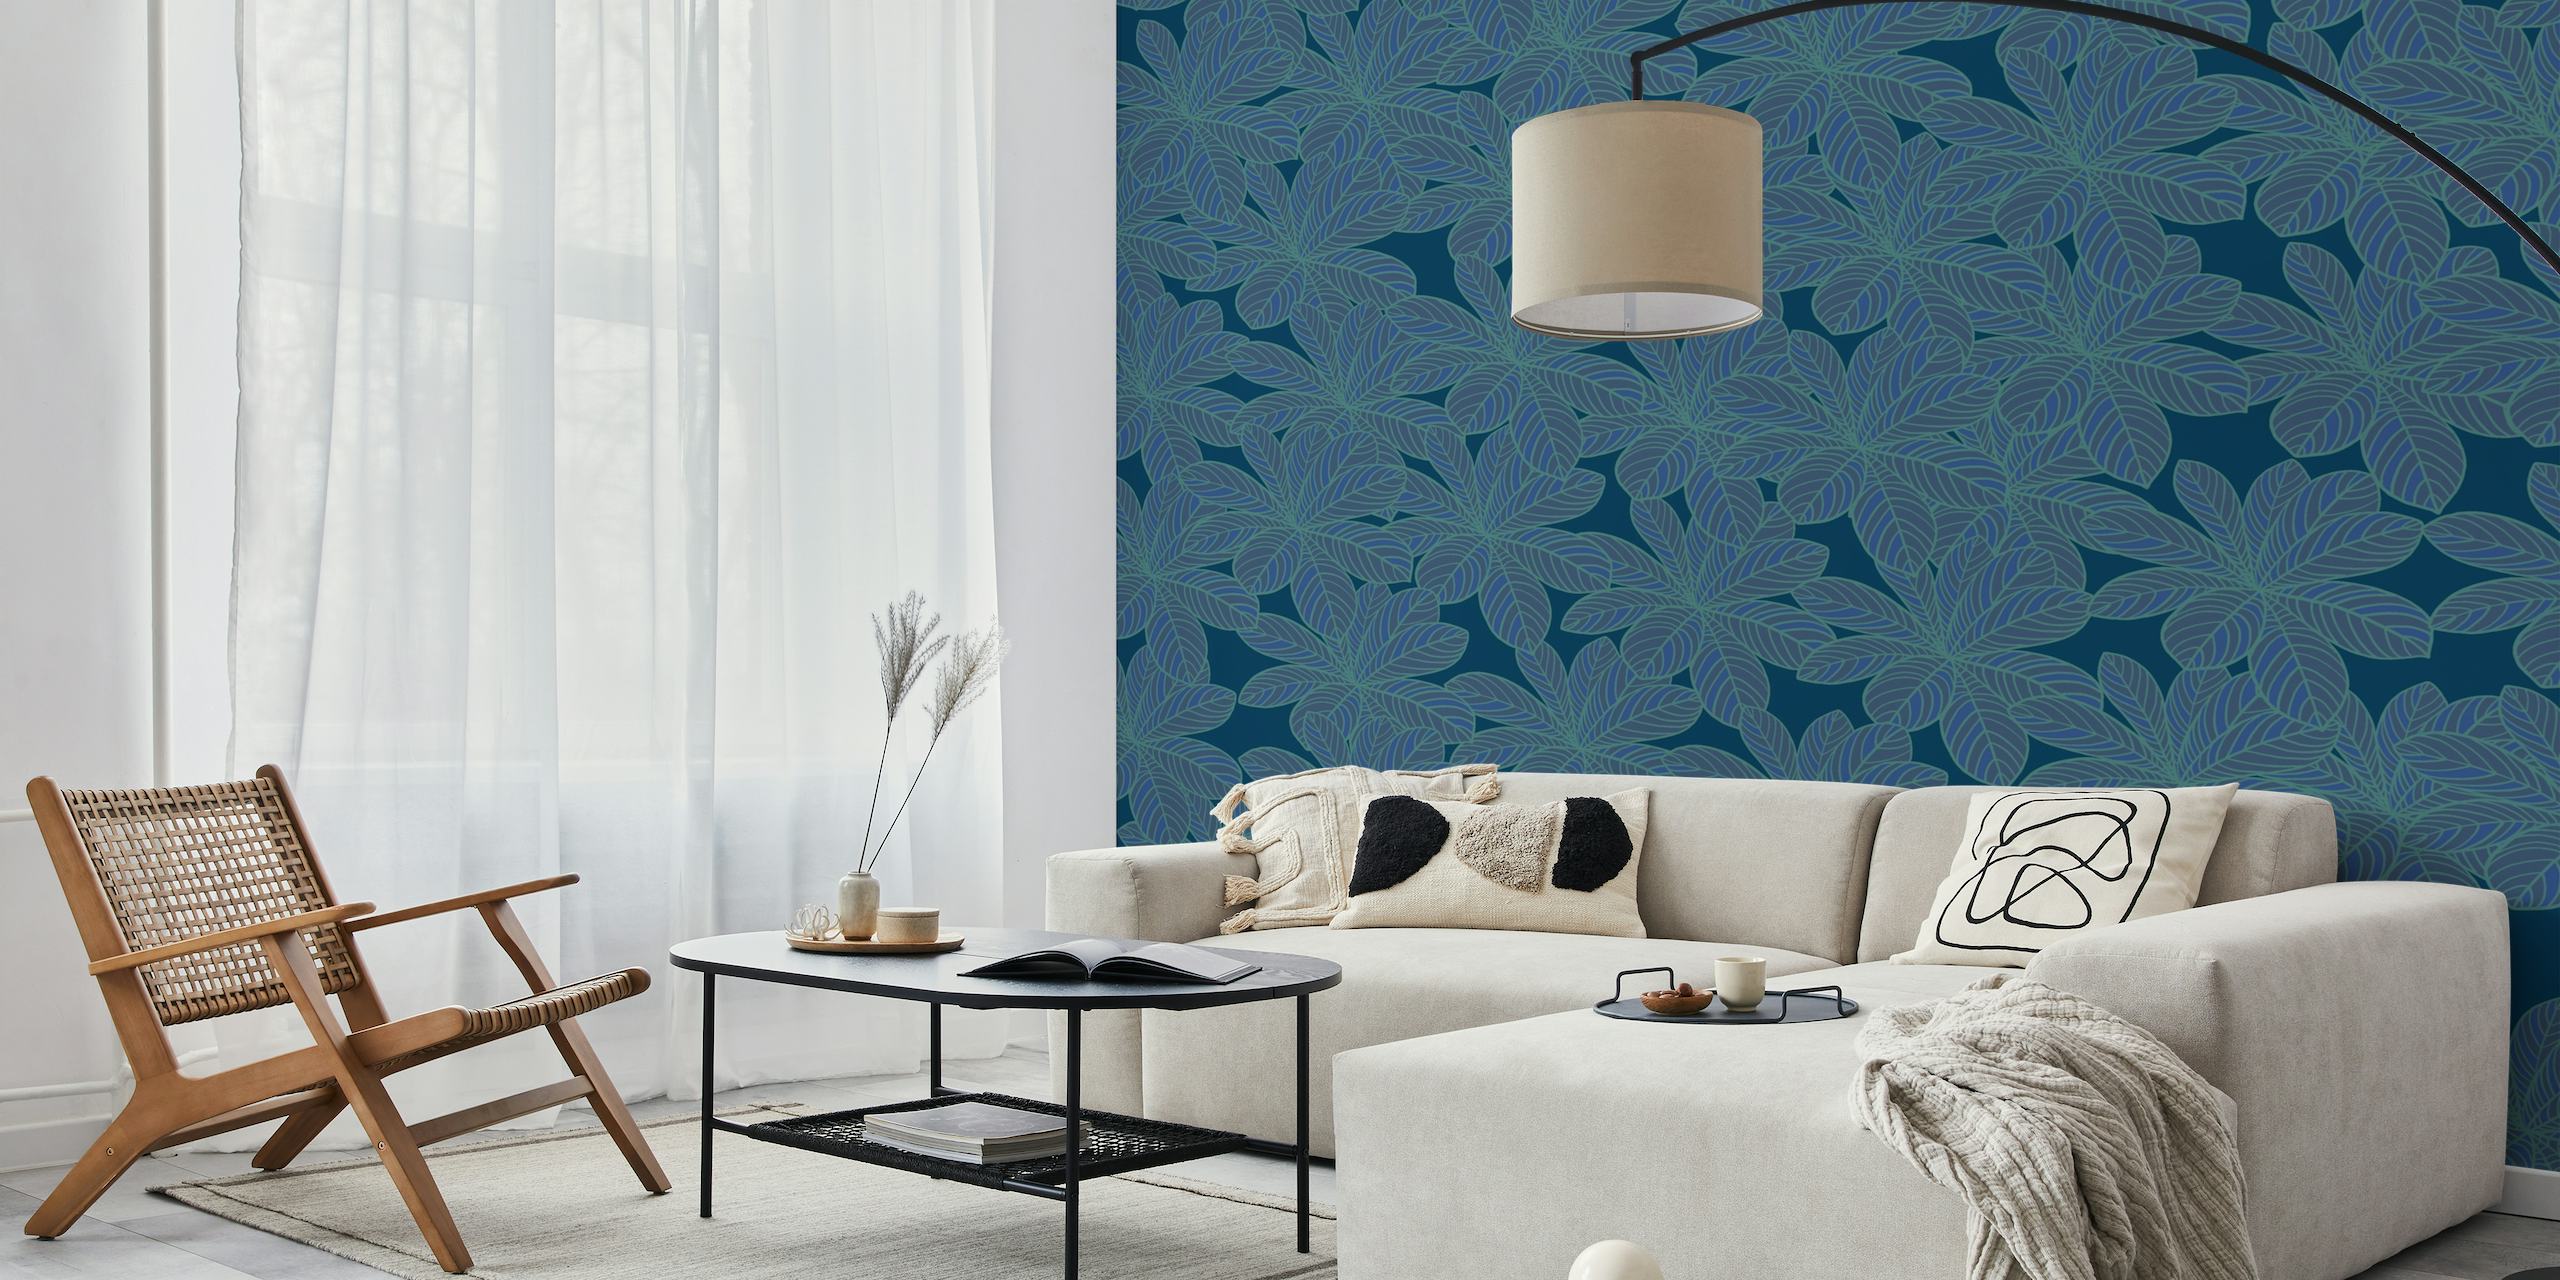 Blue leaves pattern wall mural for interior decor